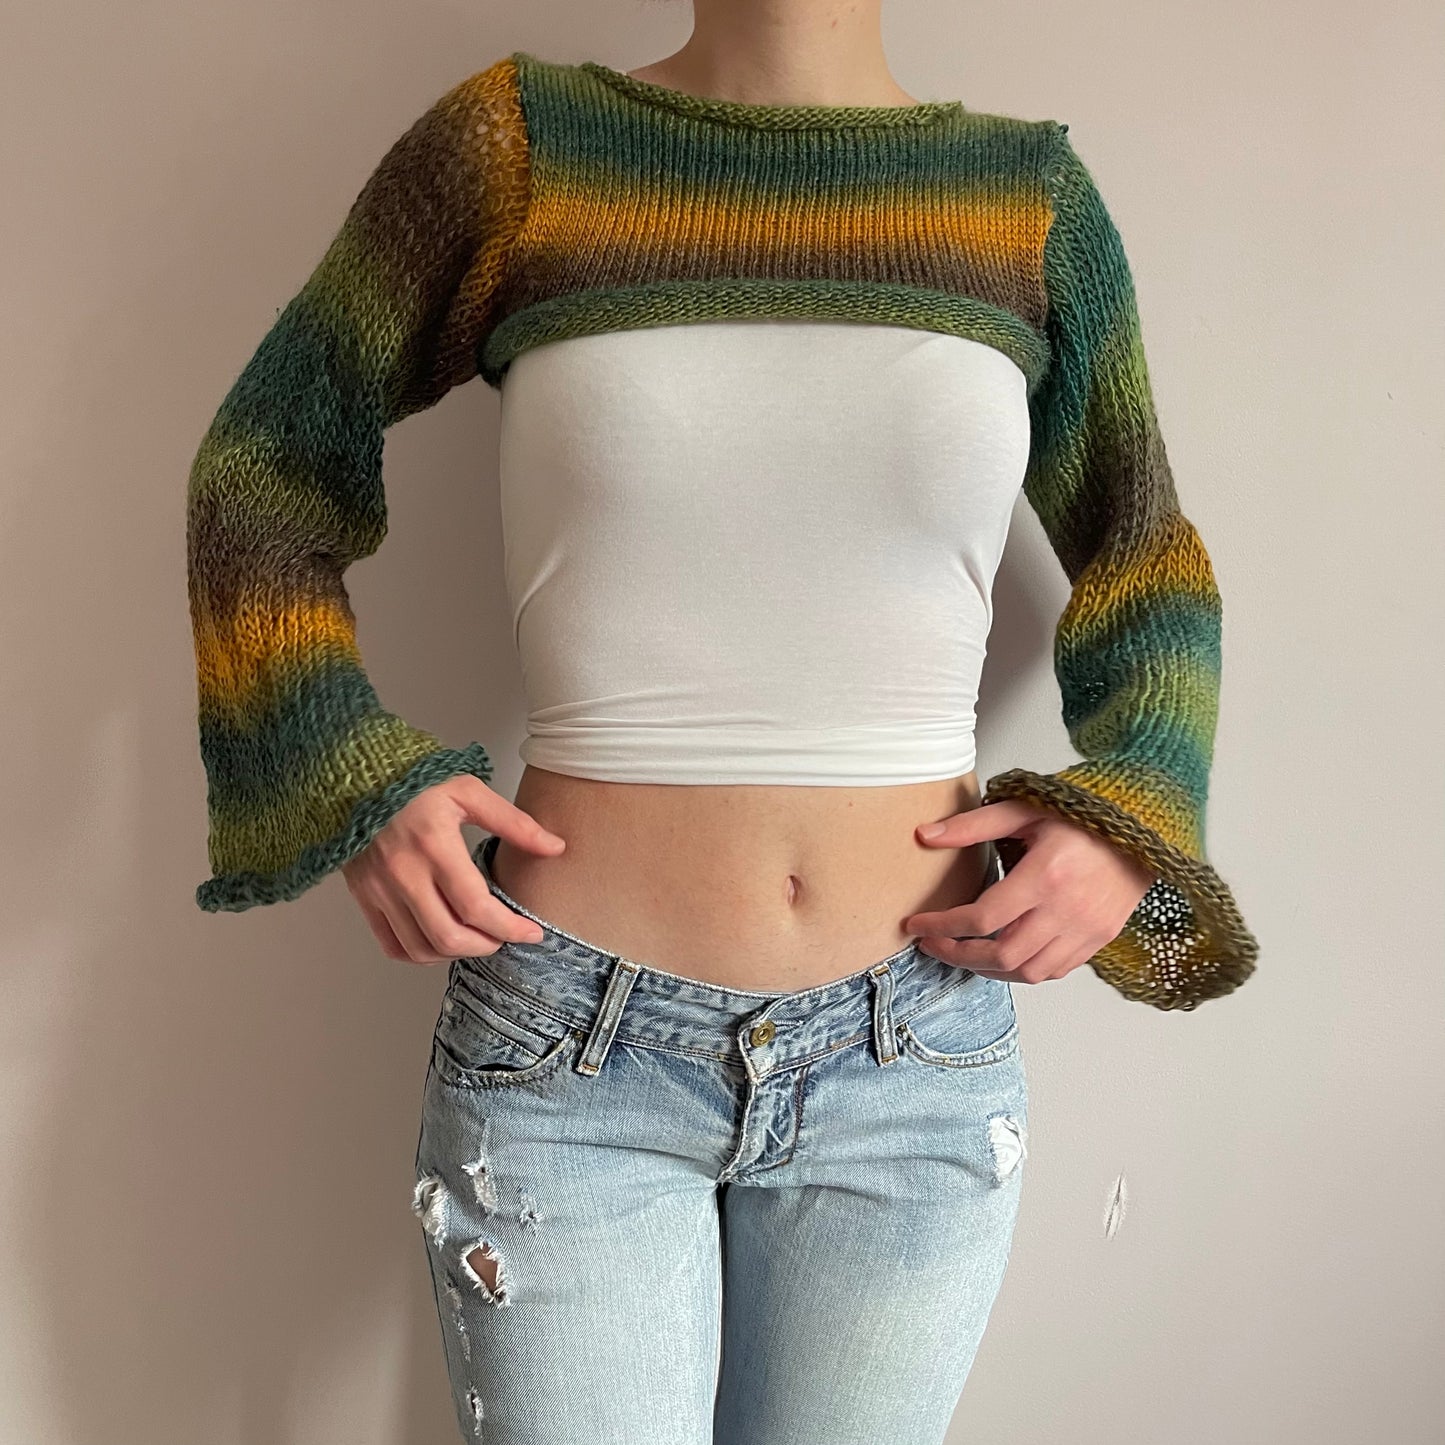 Handmade knitted ombré bolero in Forest colourway